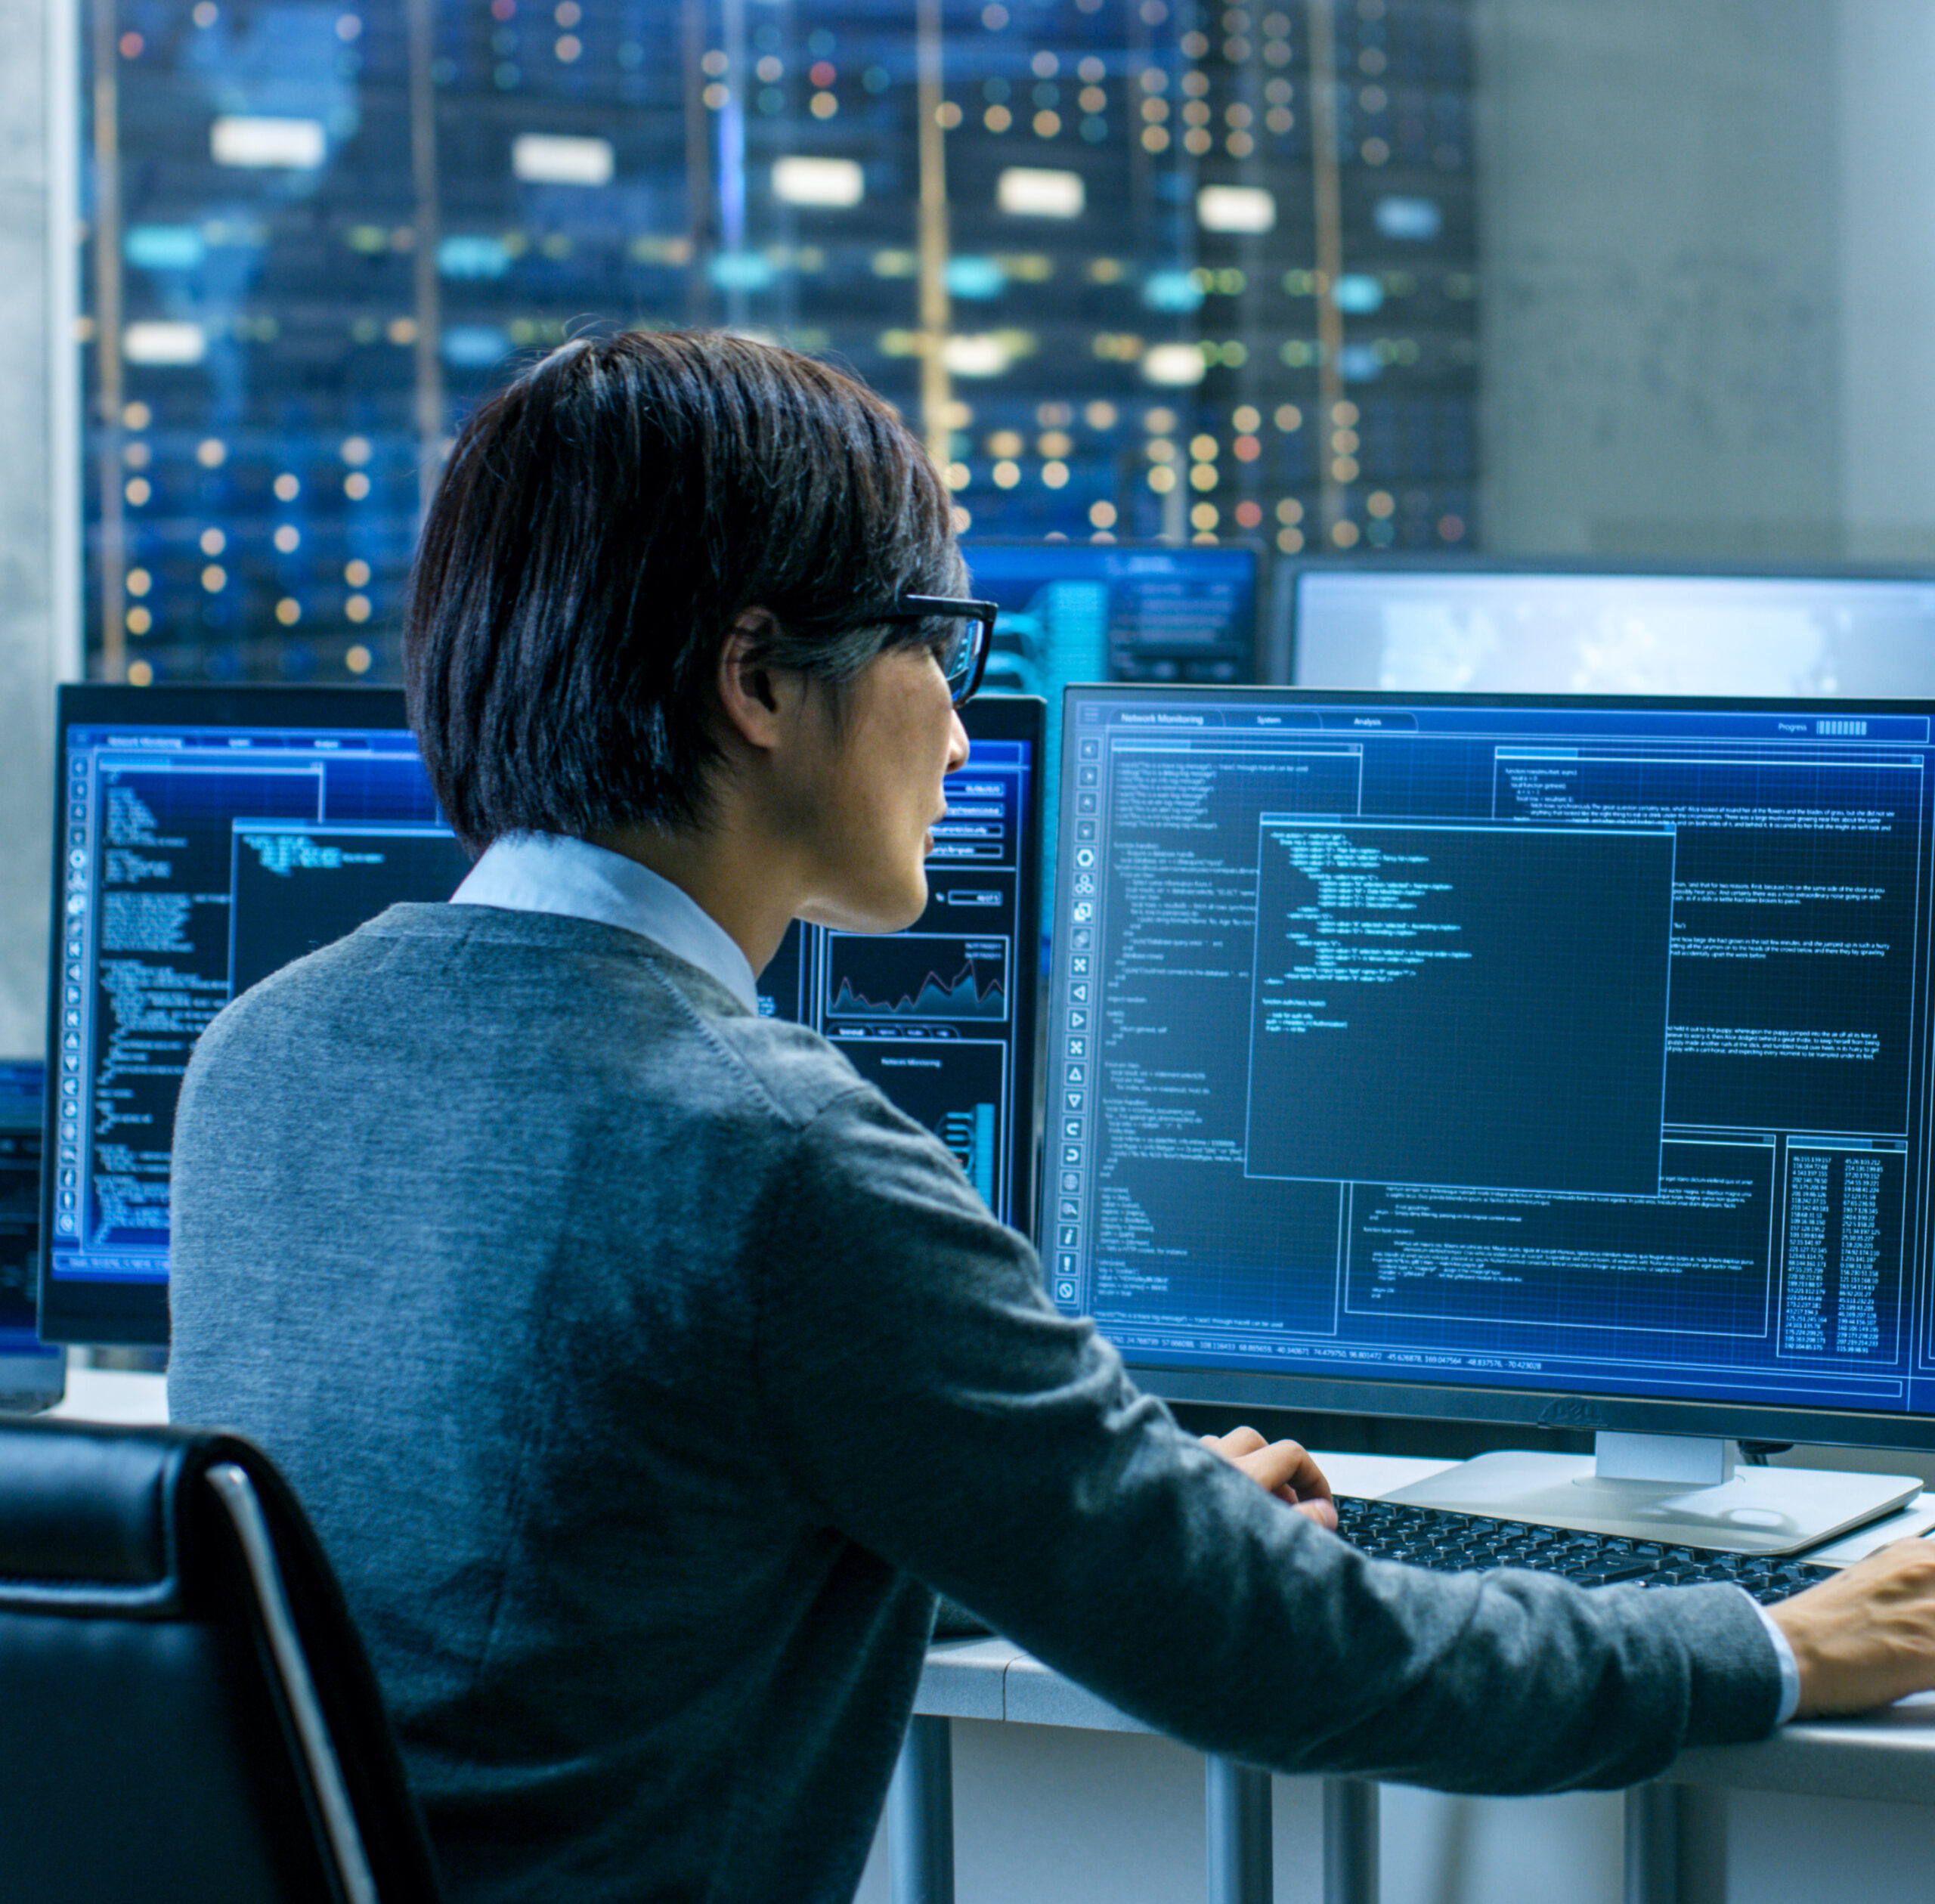 A man sits at a computer, reviewing data models and security reports for a client. Managed Detection and Response capabilities allow him to catch threats early so clients can react swiftly